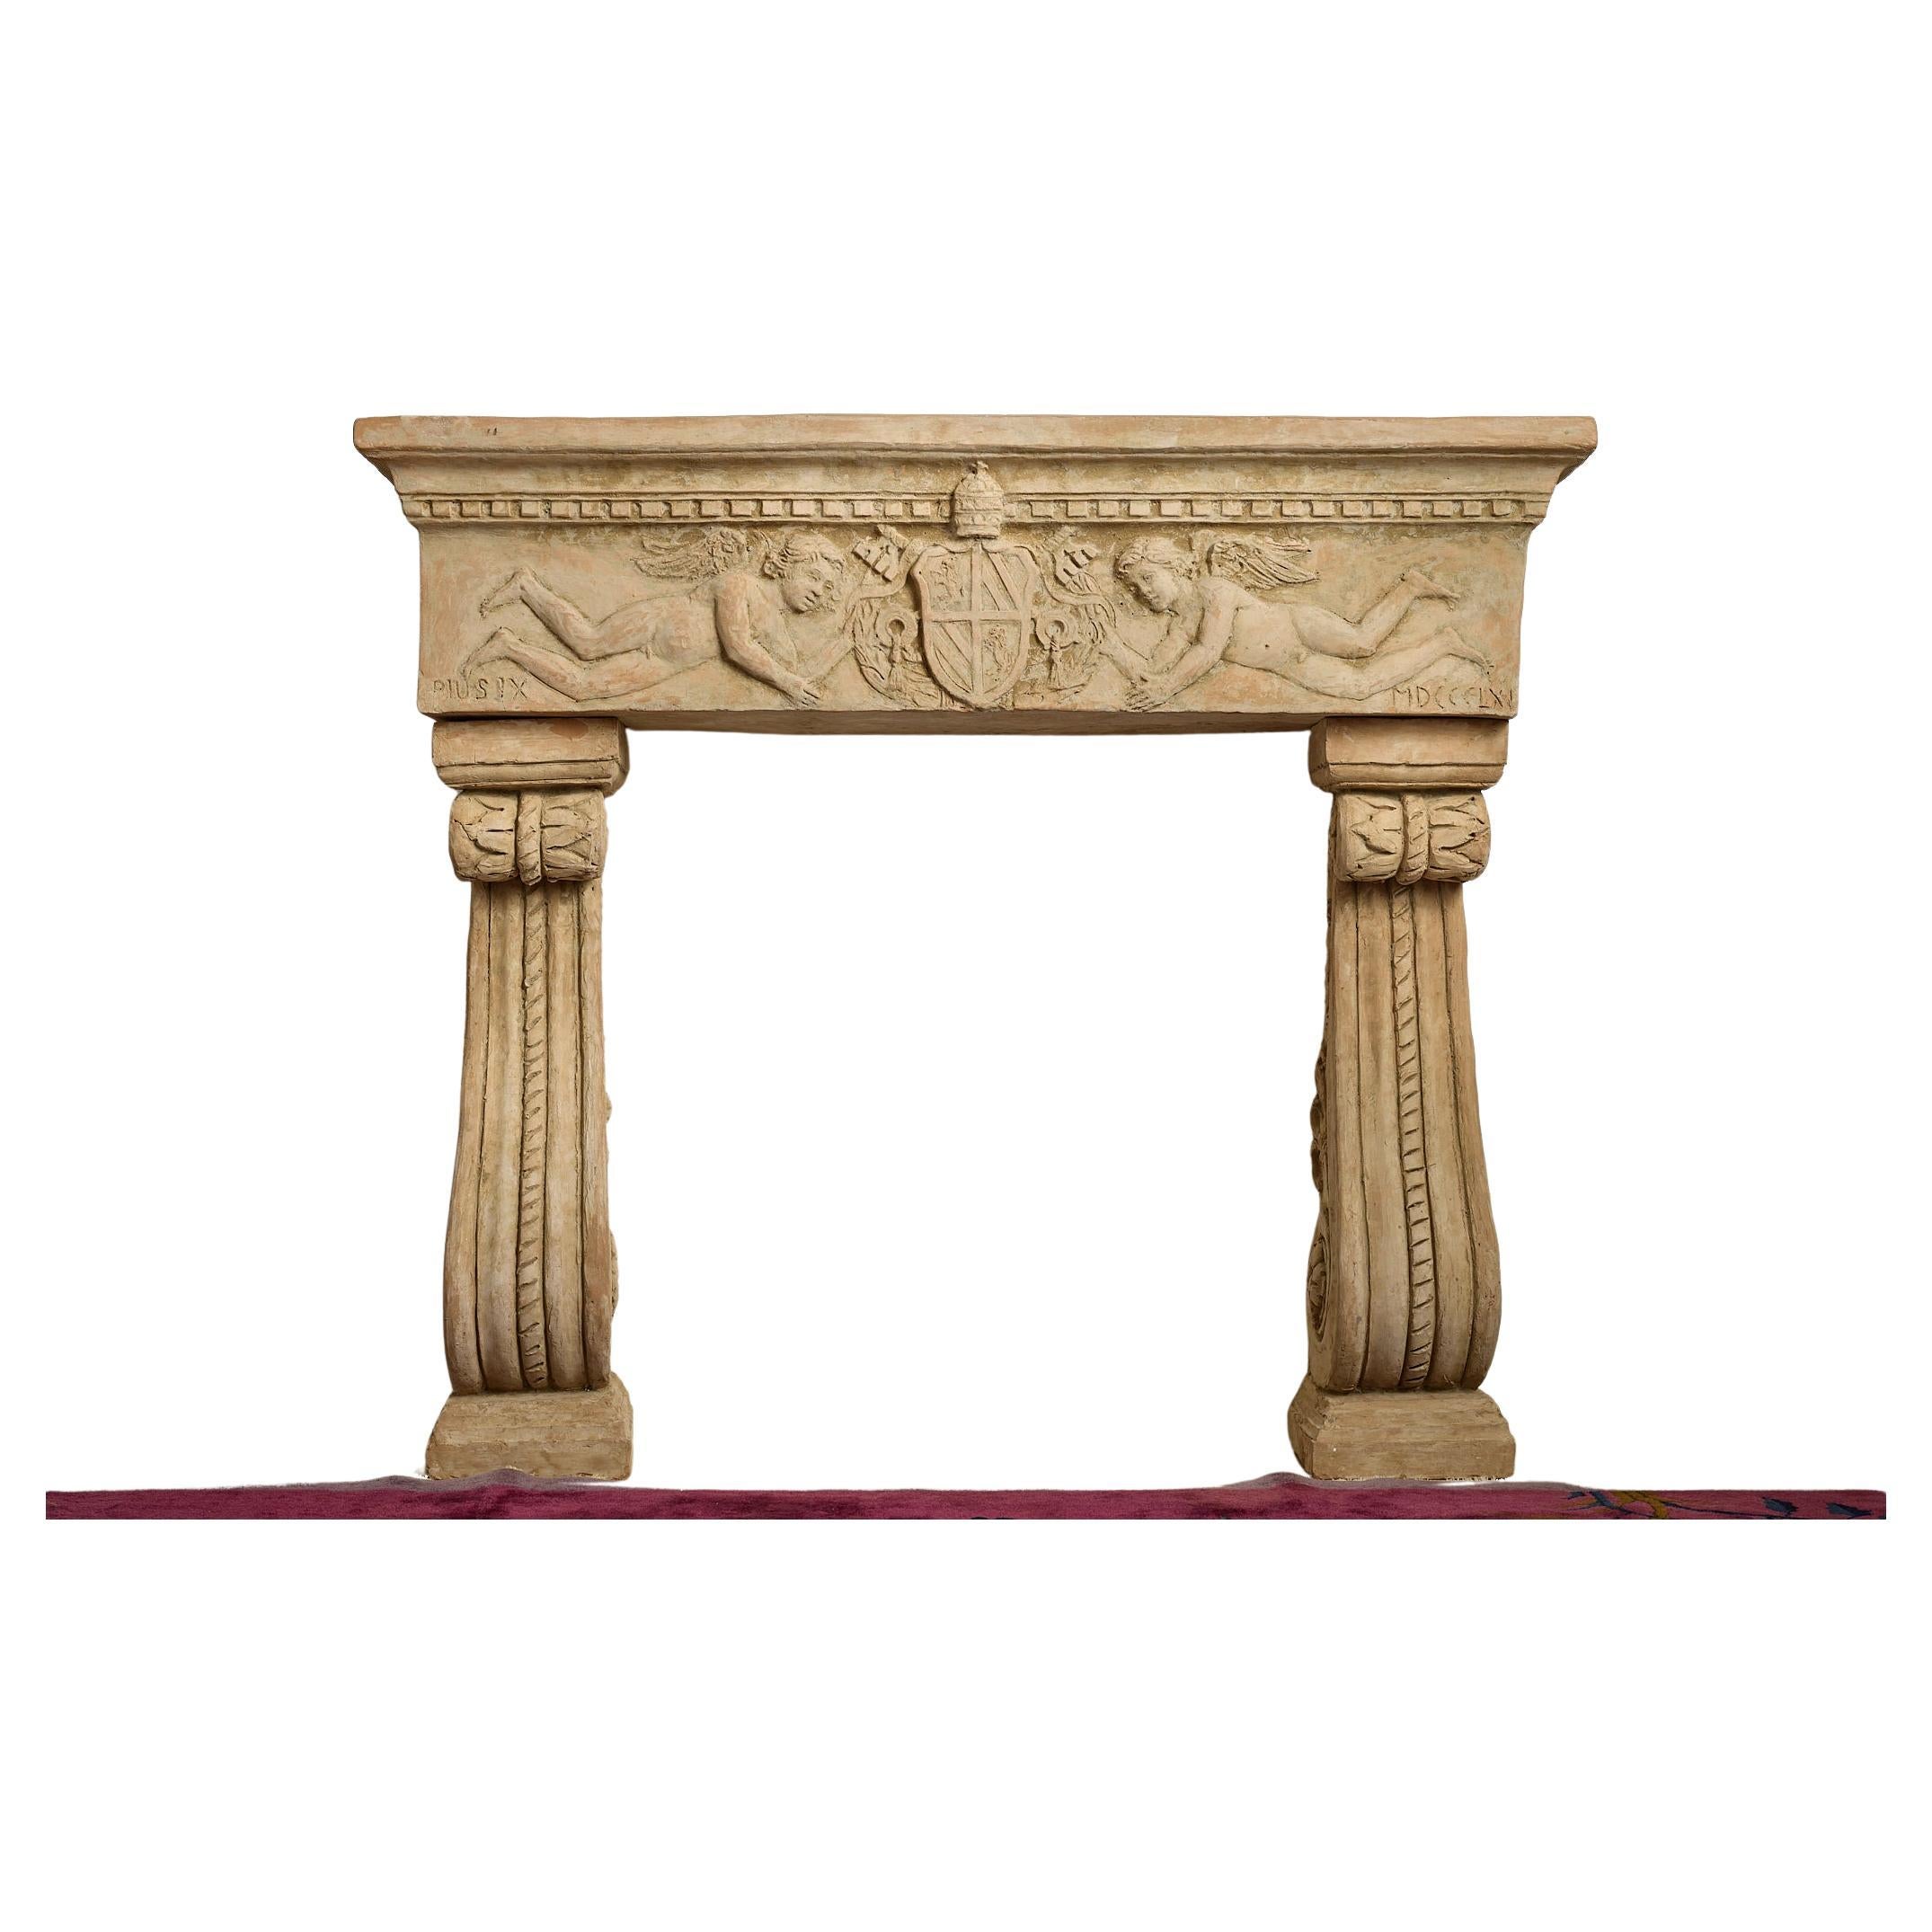 Fabulous terracotta mantel piece or fire surround, inscribed PIUS IX on the left hand side and MDCCLX (1760) on the right. The top section of the mantelpiece carved with two angels holding the papal crest of Pius IX, surmounted by dentil